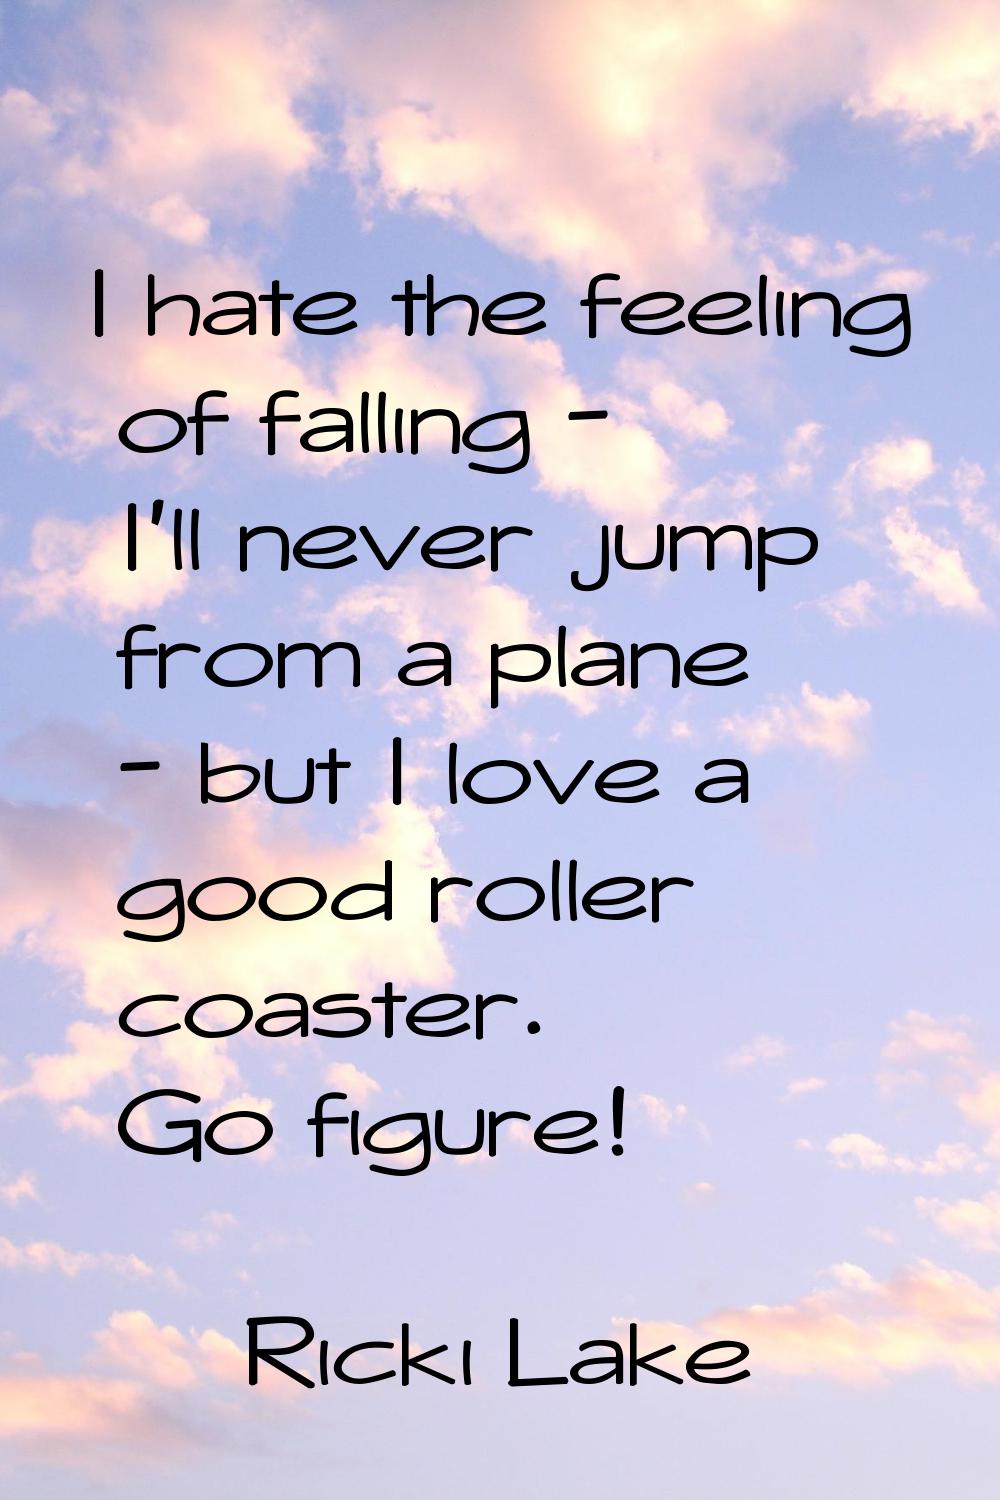 I hate the feeling of falling - I'll never jump from a plane - but I love a good roller coaster. Go